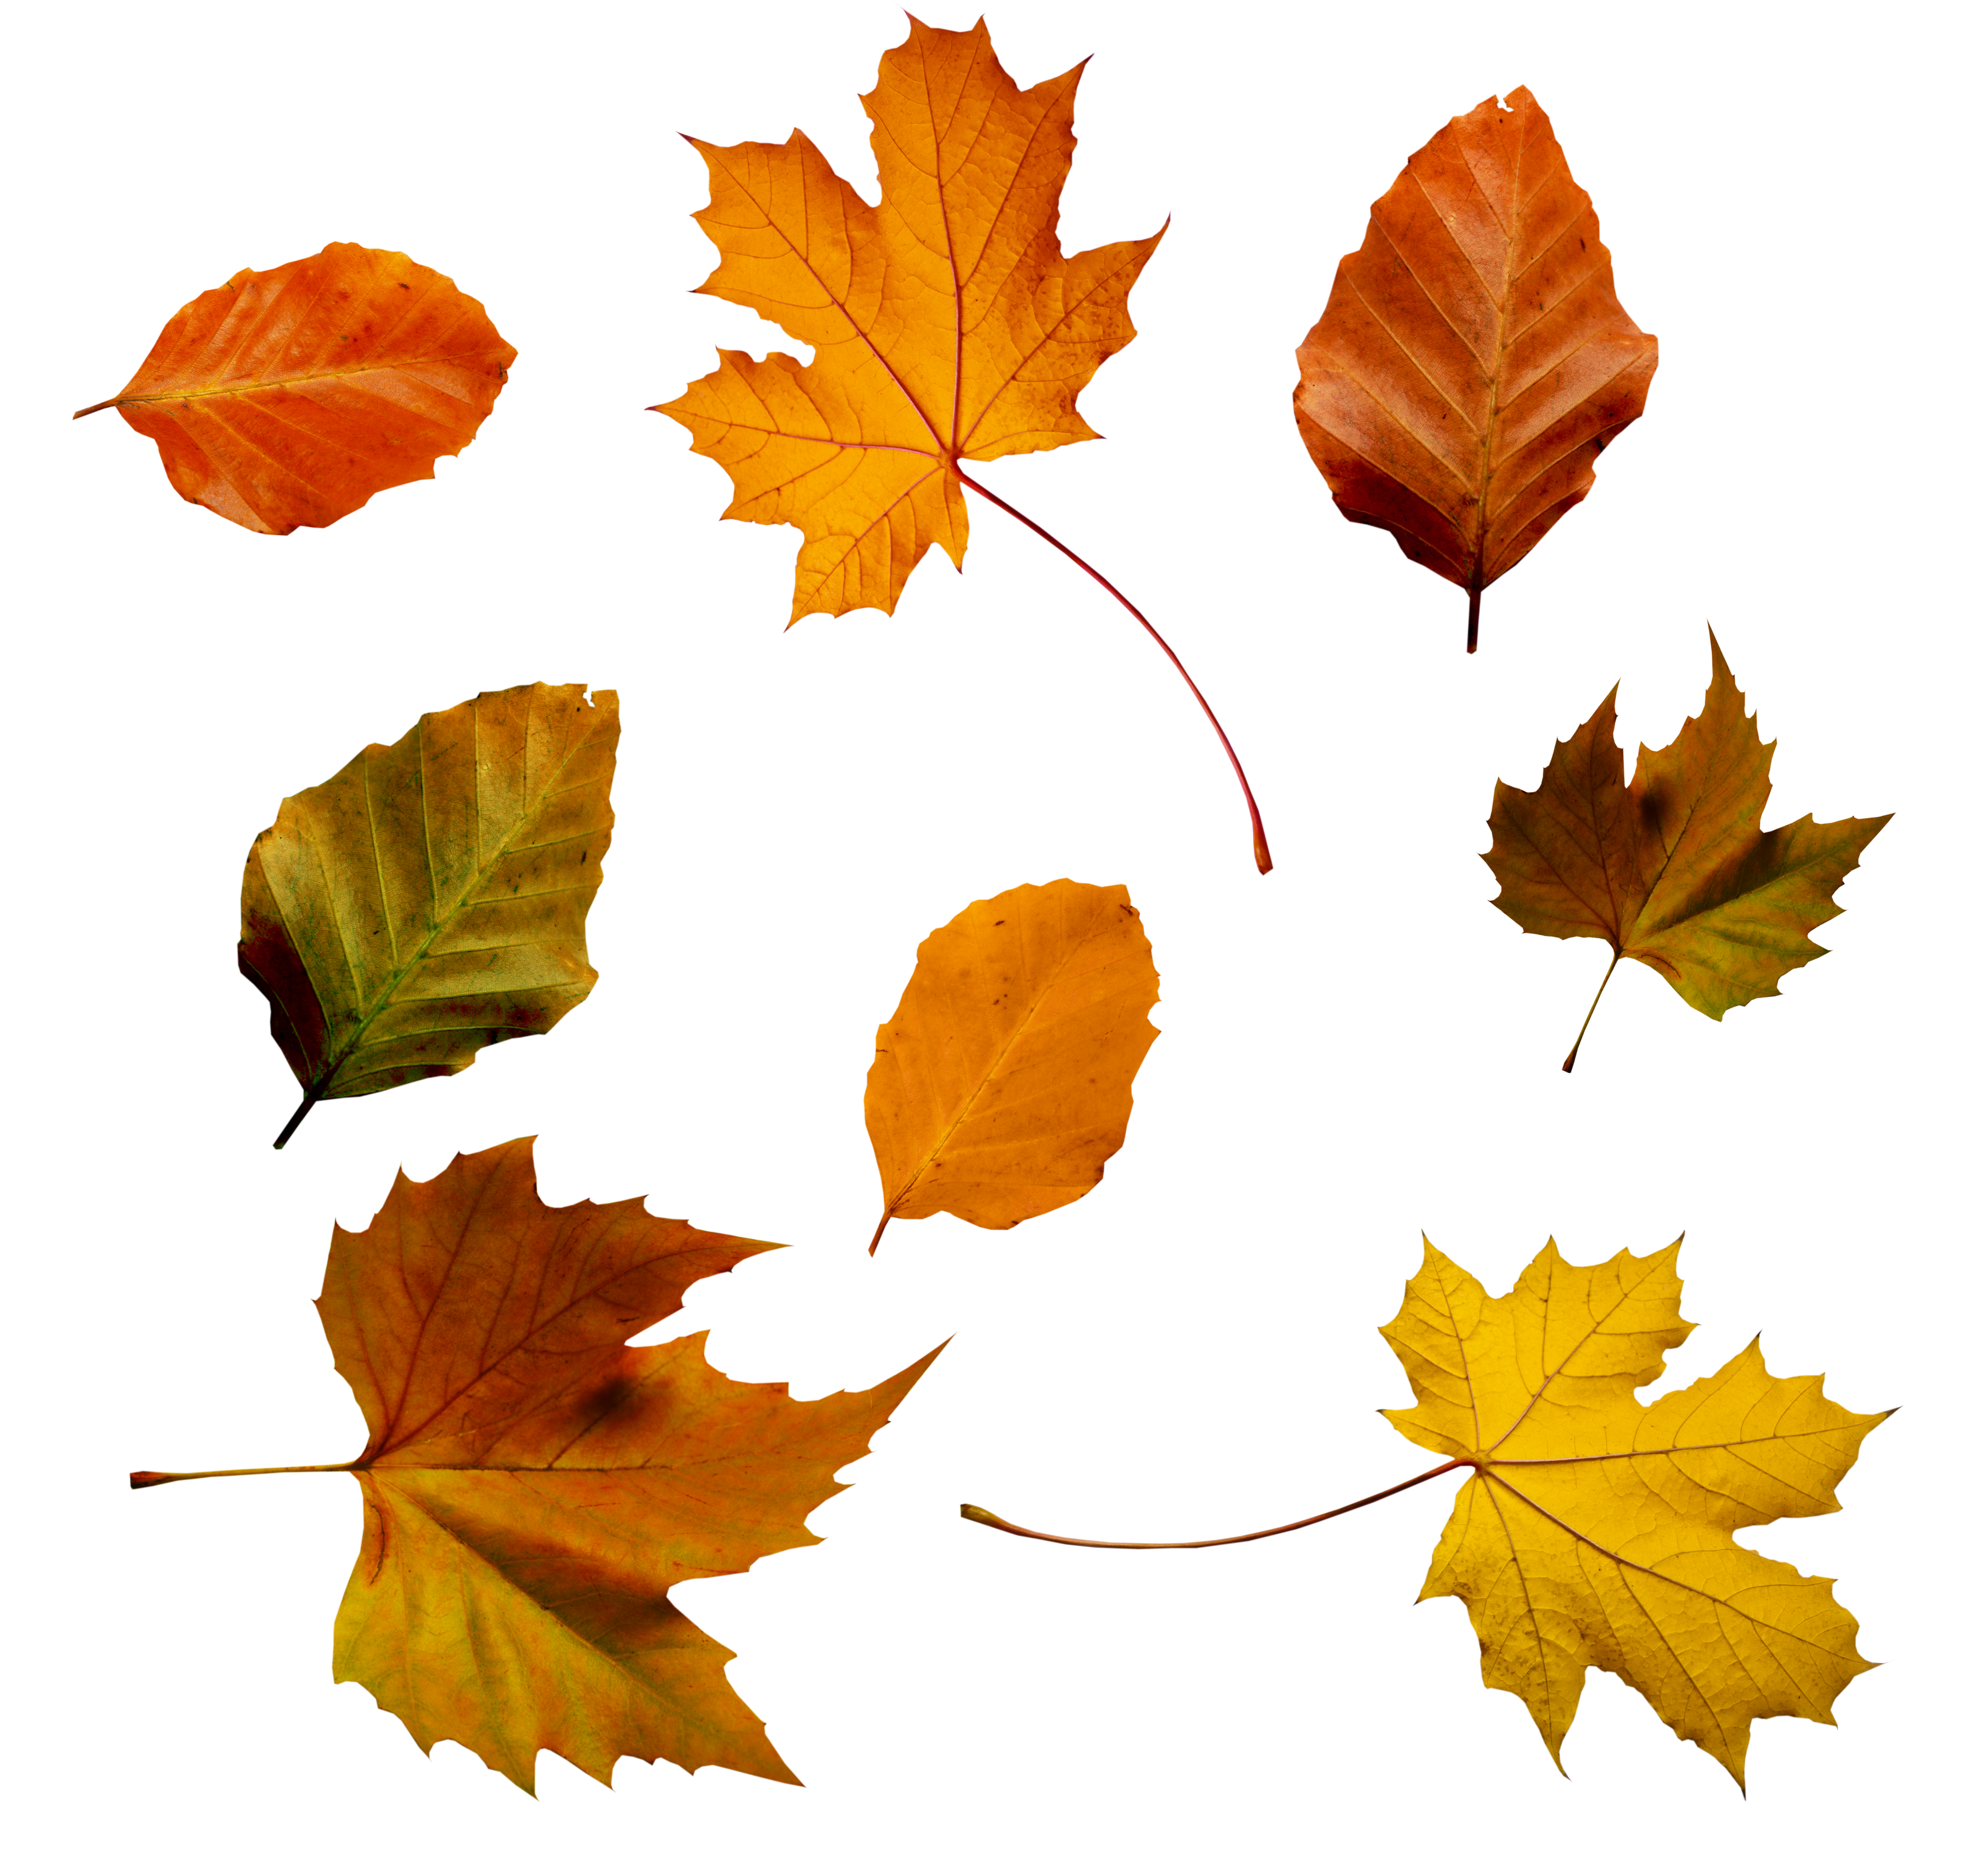 Autumn Leaves PSD by Atticresources on Clipart library